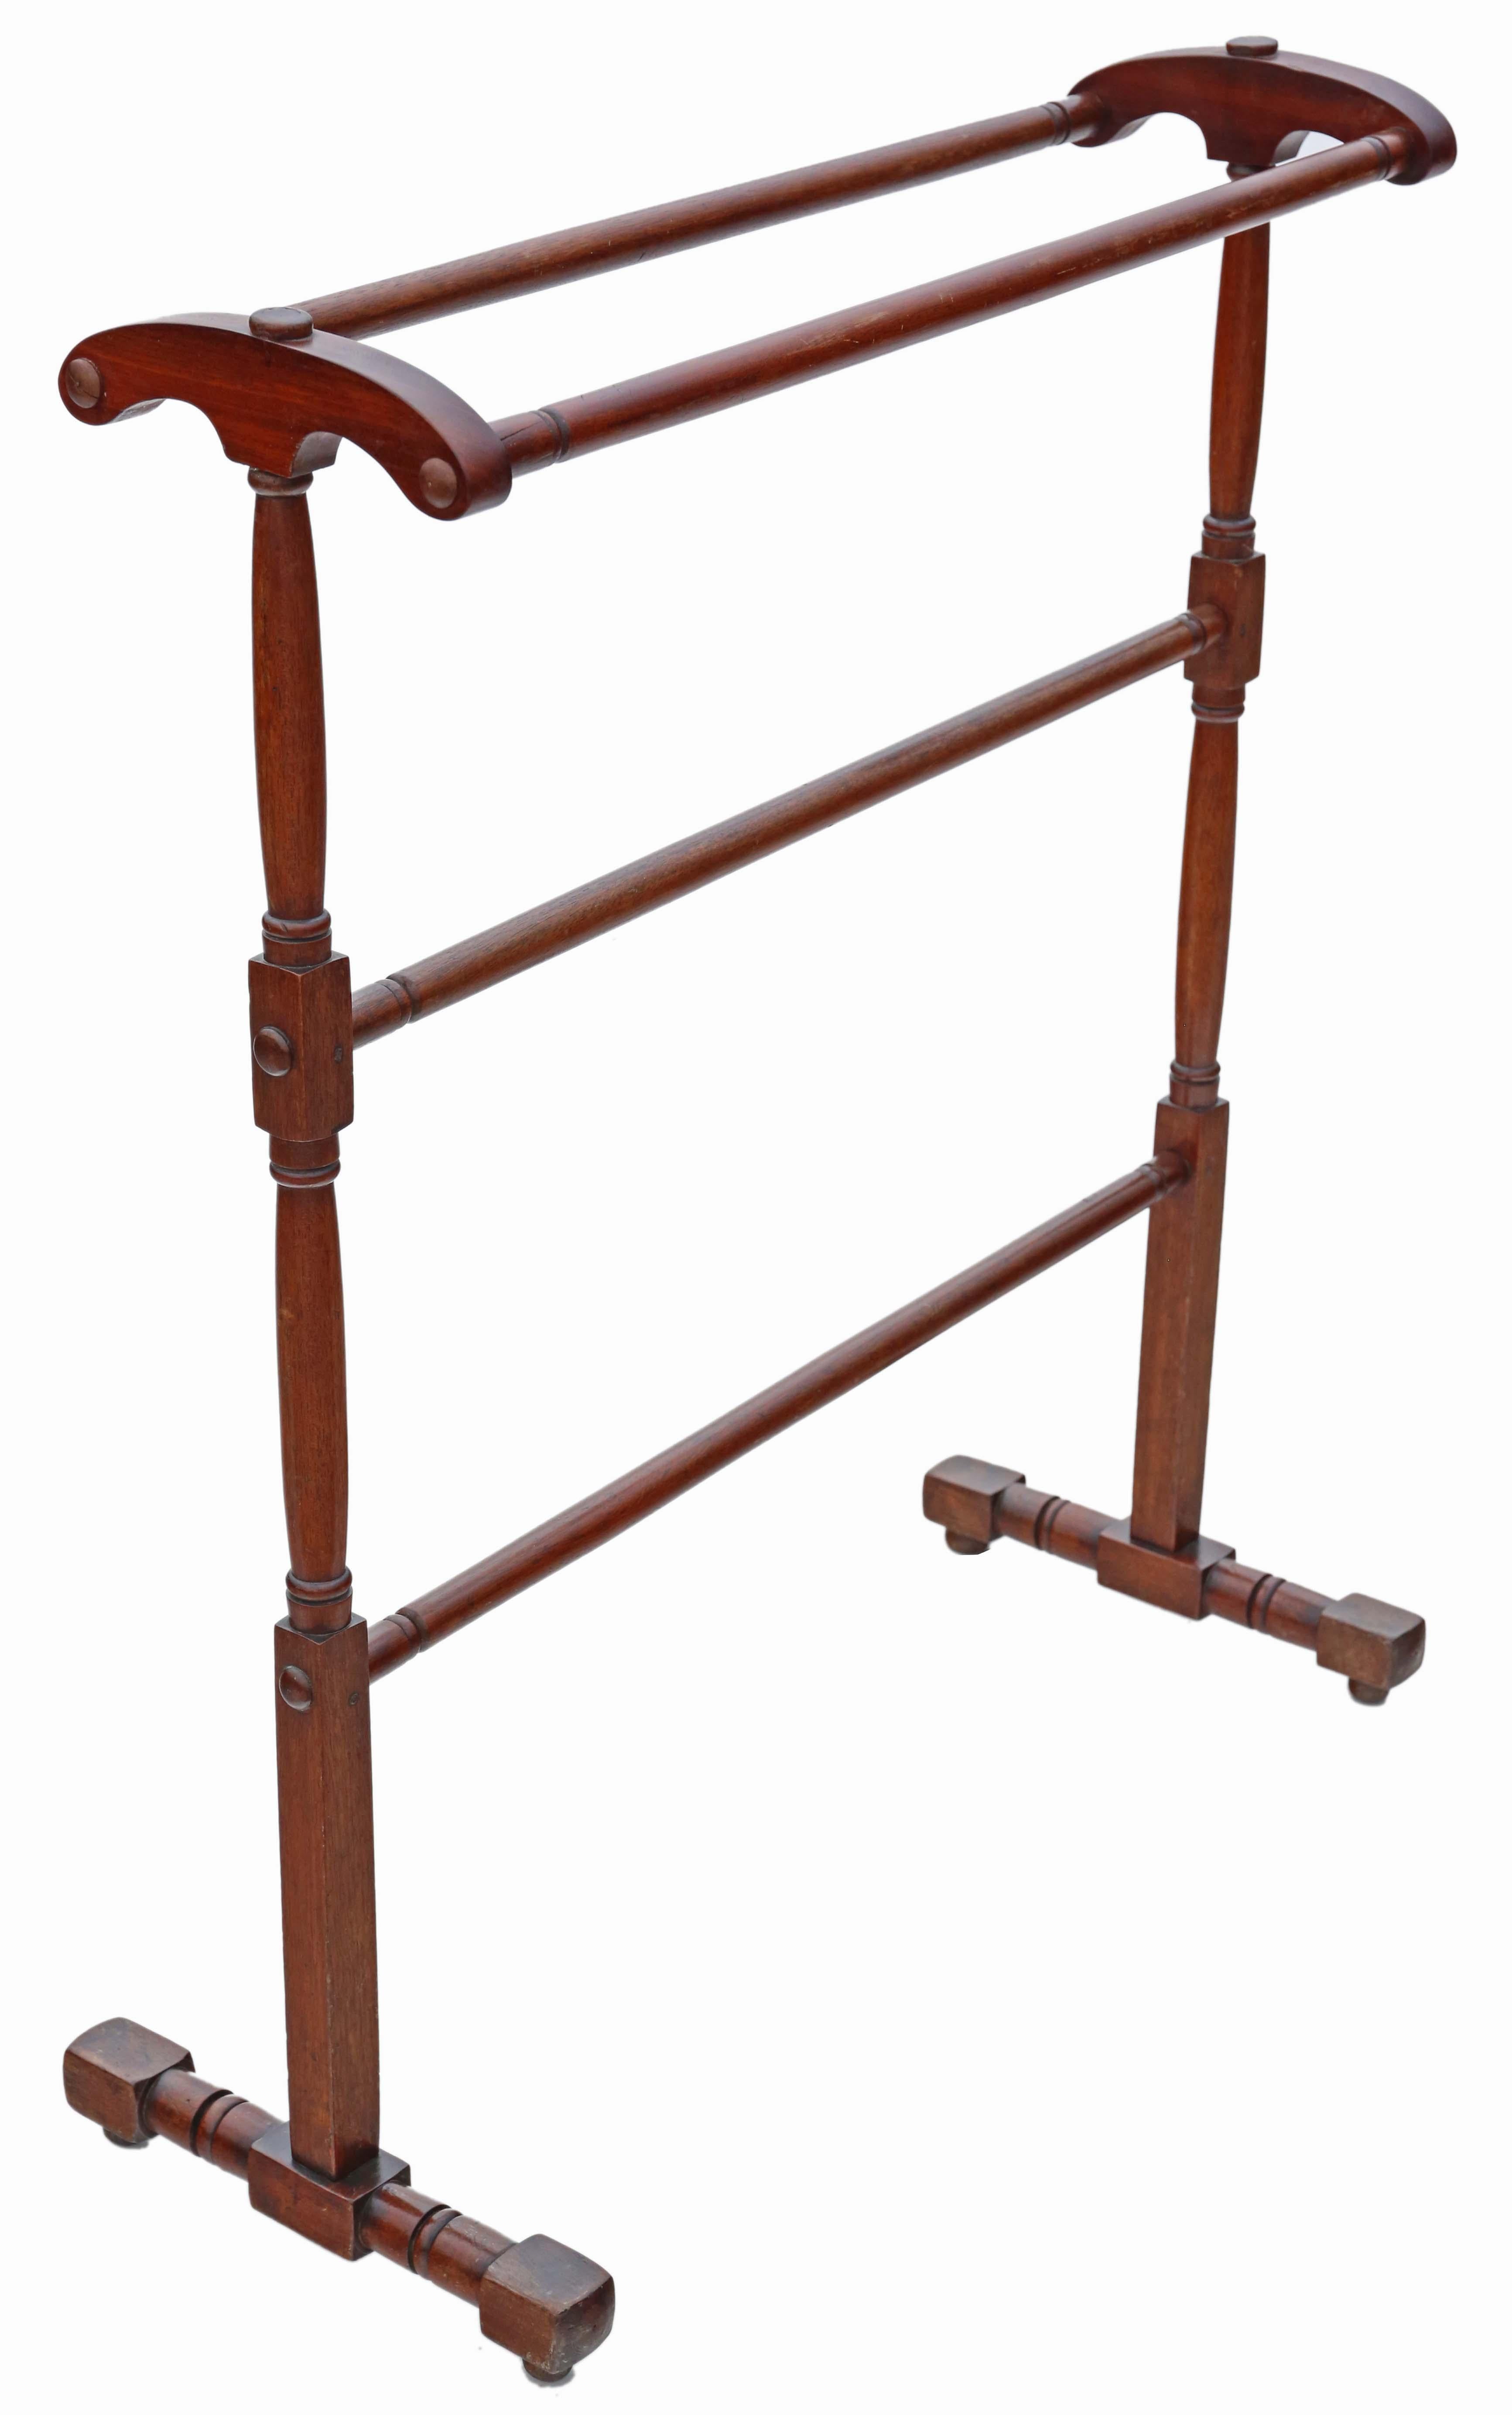 Antique quality Edwardian C1910 inlaid mahogany towel rail stand Art Nouveau.

No loose joints and no woodworm.

Would look amazing in the right location!

Overall maximum dimensions:

68cmW x 30cmD x 82cmH.

In good antique condition with minor